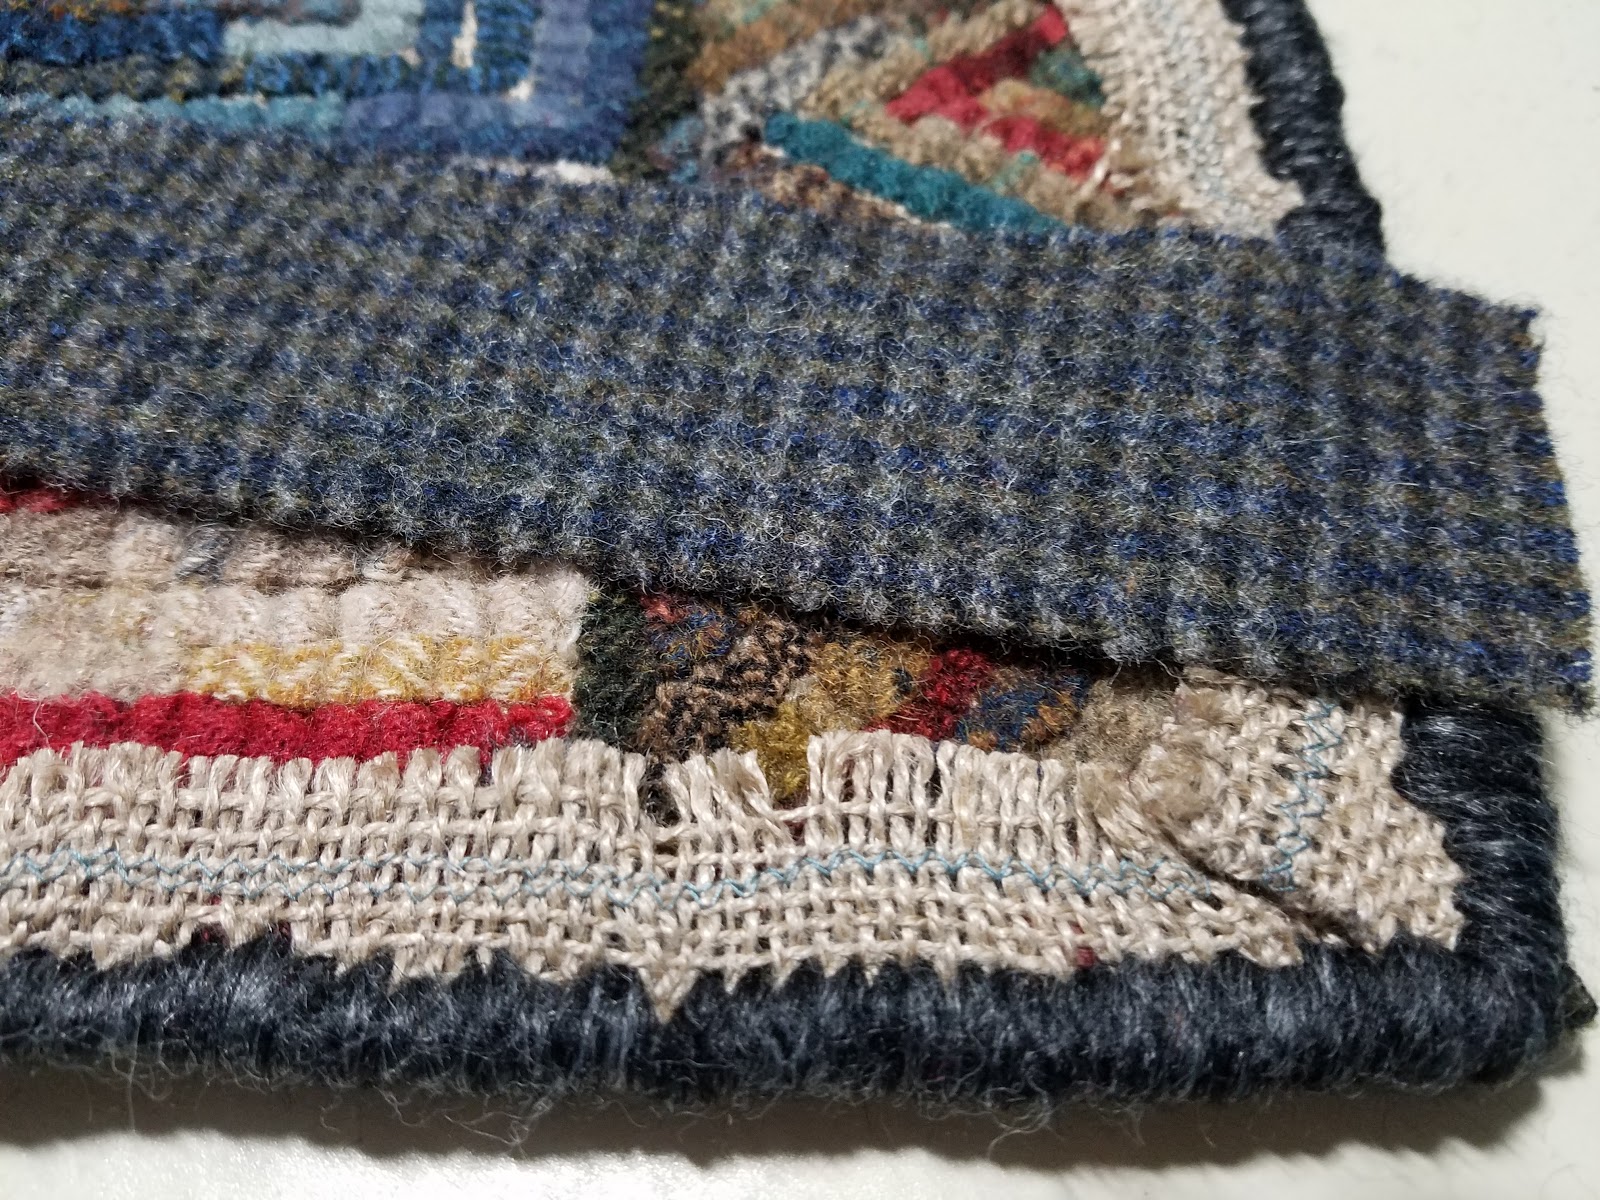 With Hook and Needle: Finishing a Small Rug